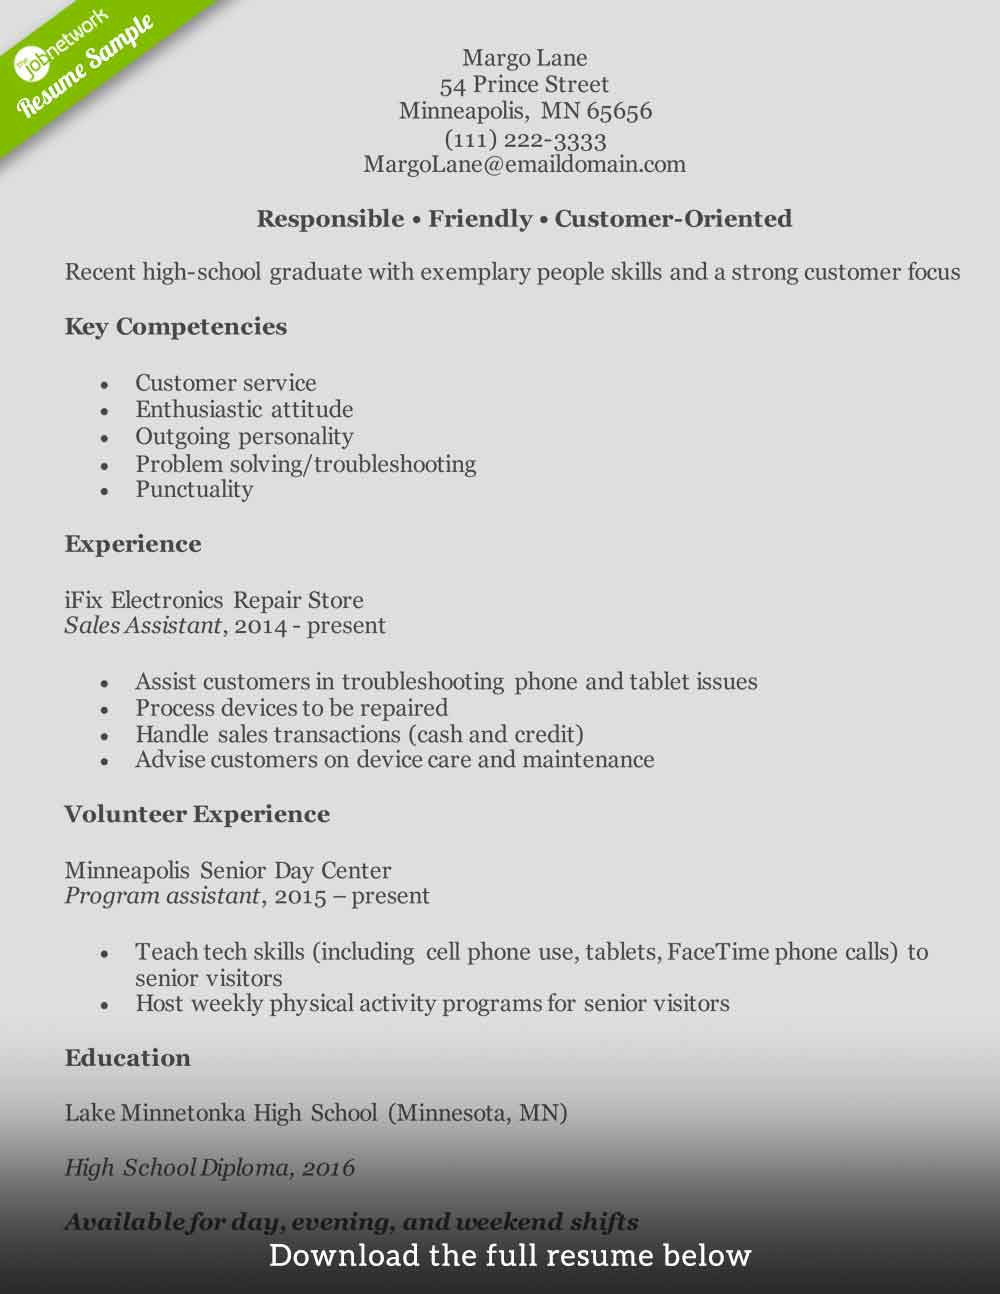 Sample Resume Customer Service Sale Store Customer Service Resume -how to Write the Perfect One (examples)